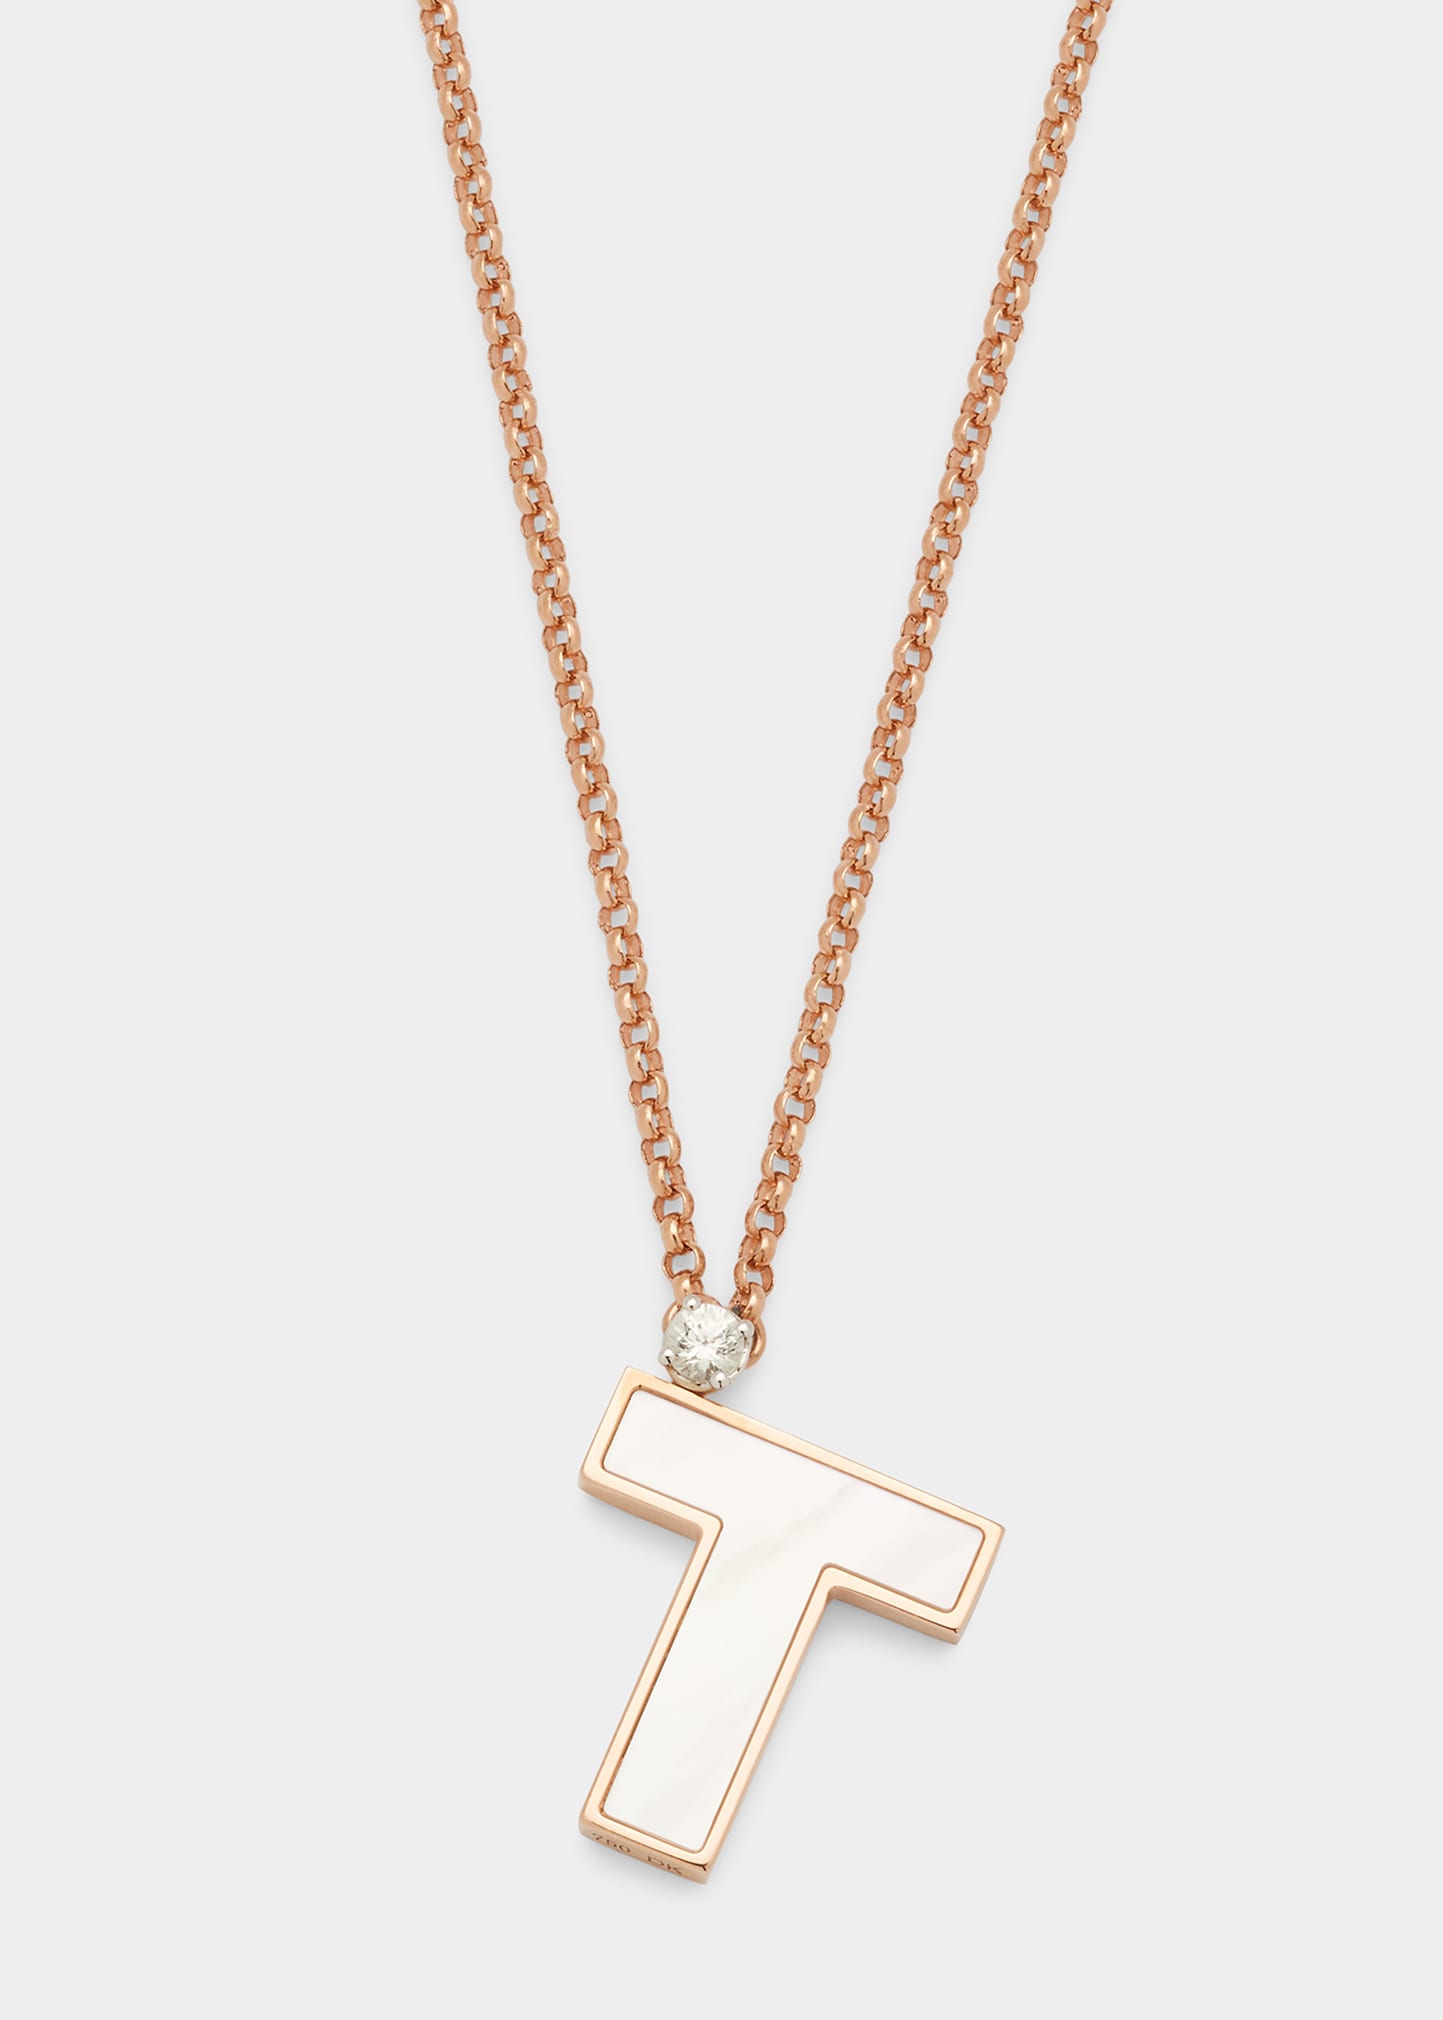 Rose Gold 'T' Letter Charm Necklace with Mother-of-Pearl and White Sapphire